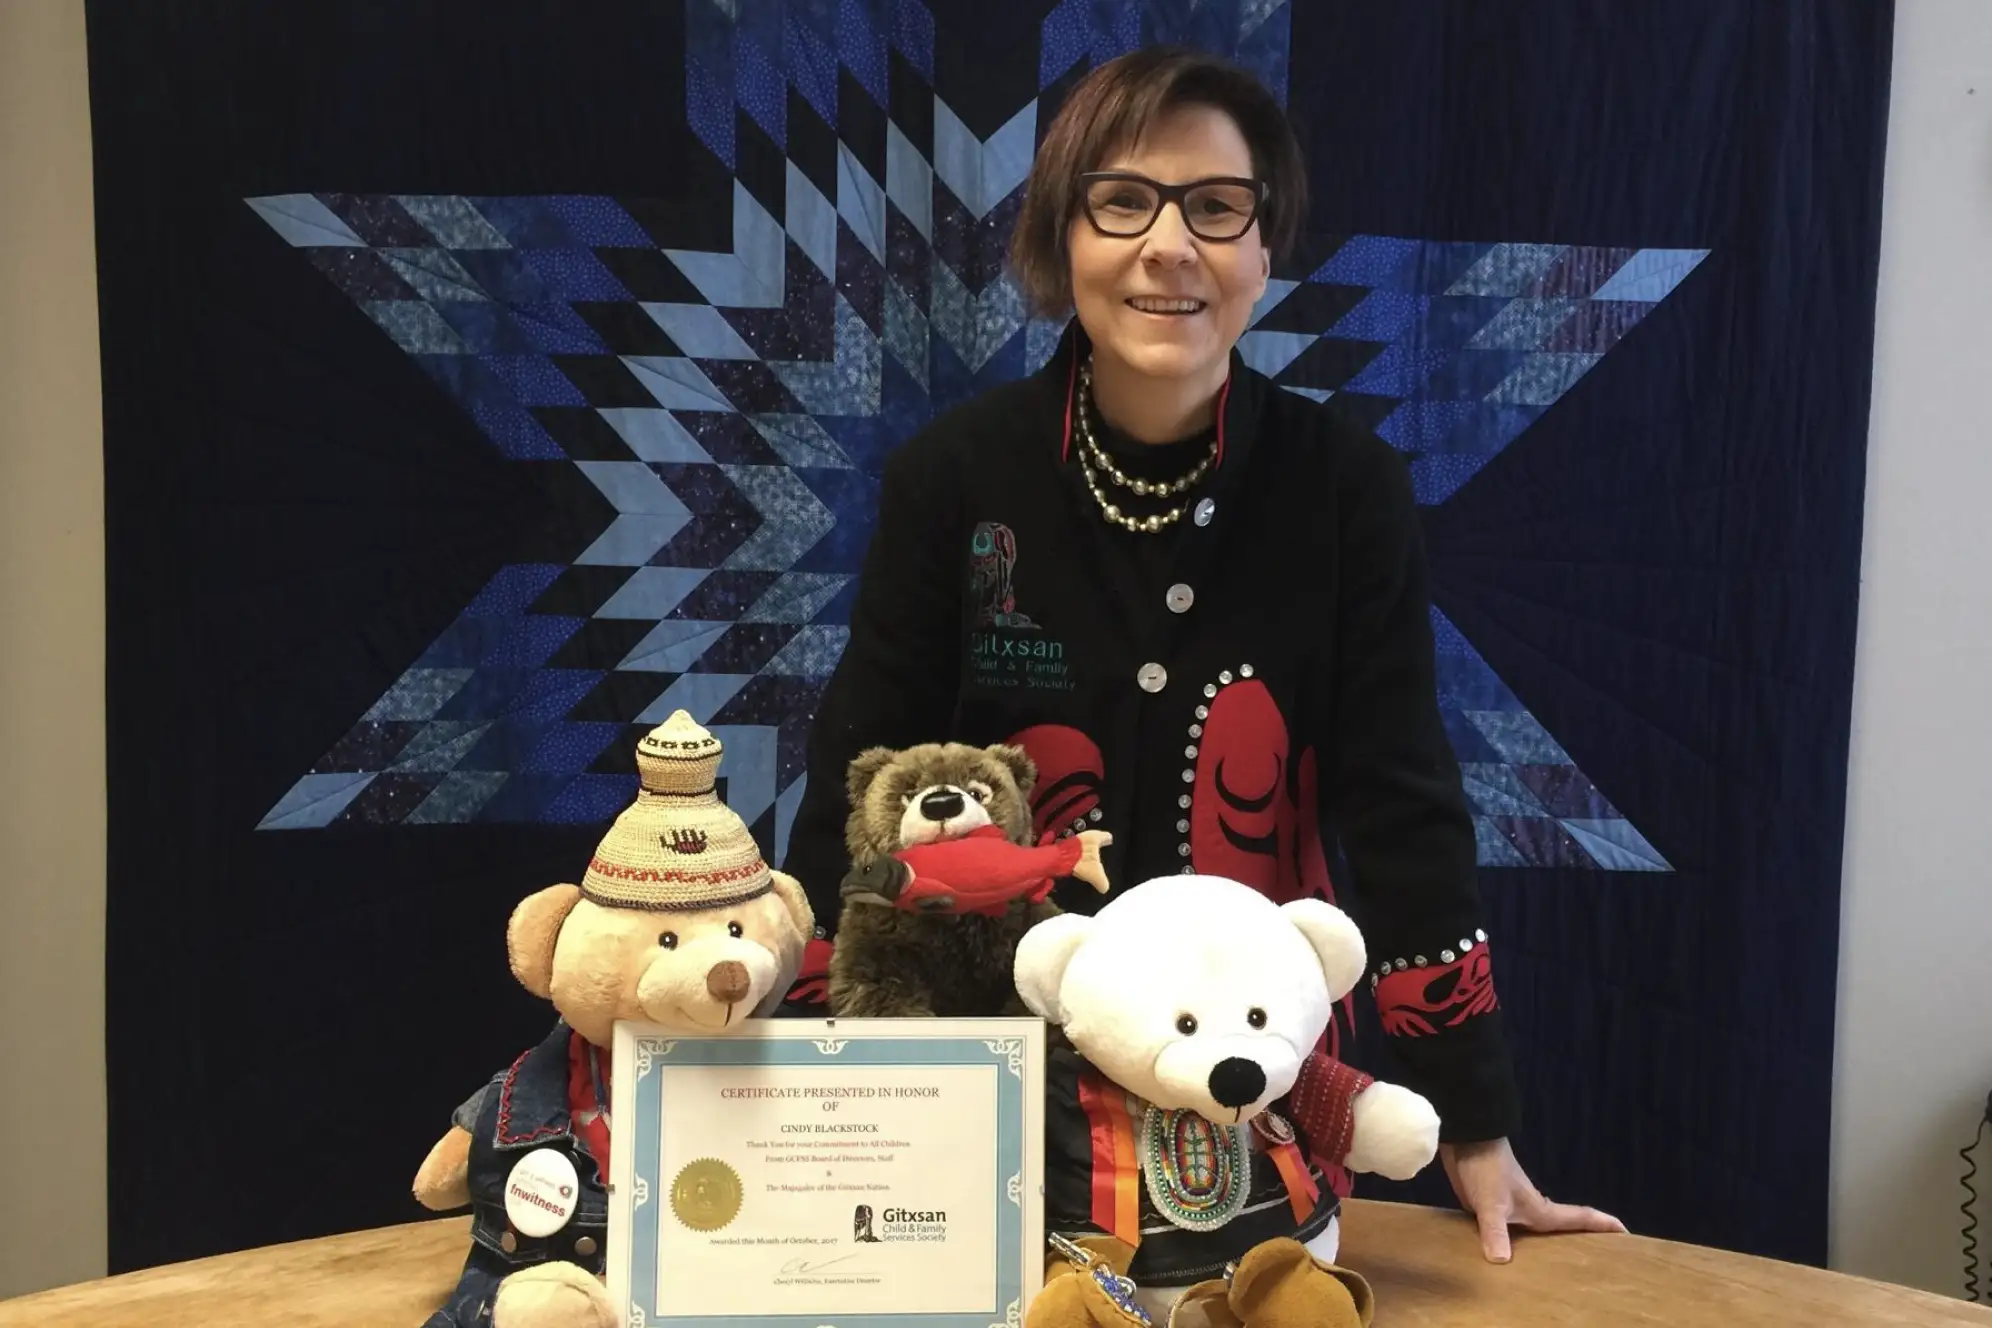 Woman with short brown hair standing in from of a blue quilt with three stuffed animals and certificate on table in front of her